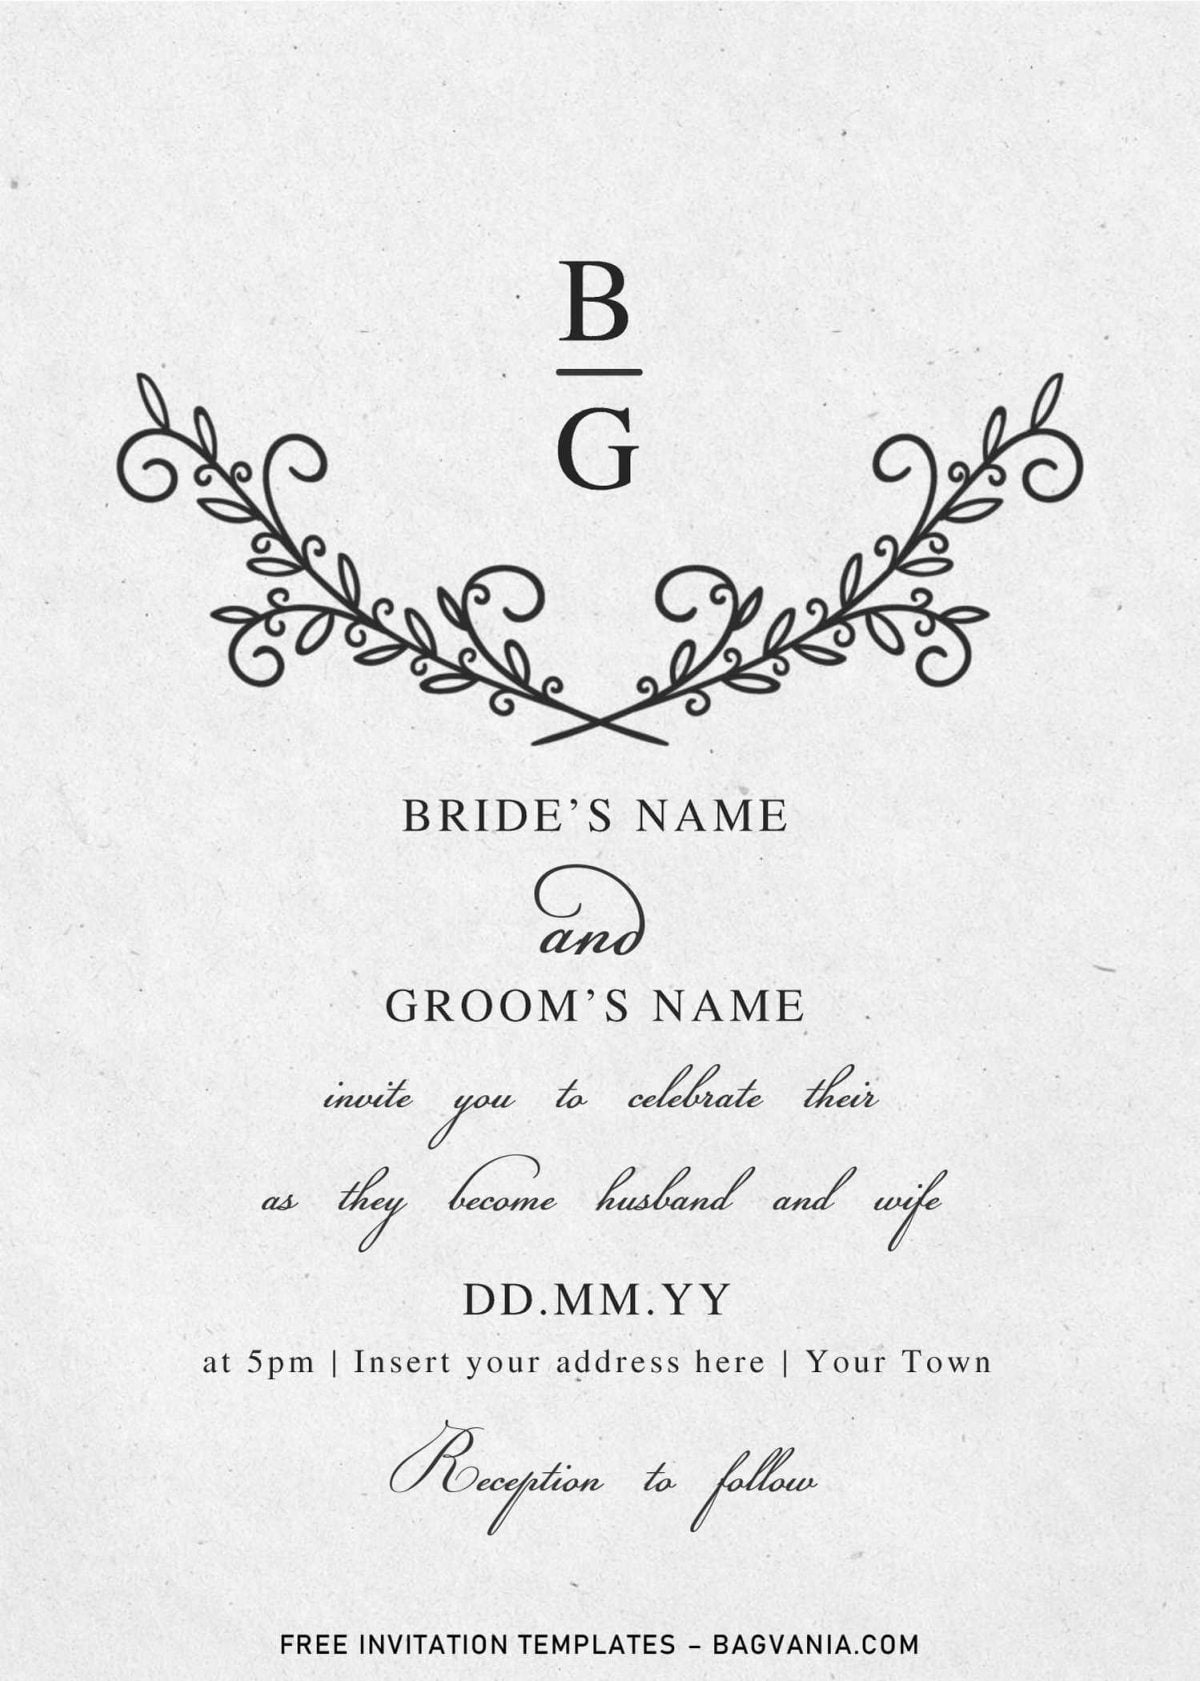 Free Floral Monogram Wedding Invitation Templates For Word and has elegant typography